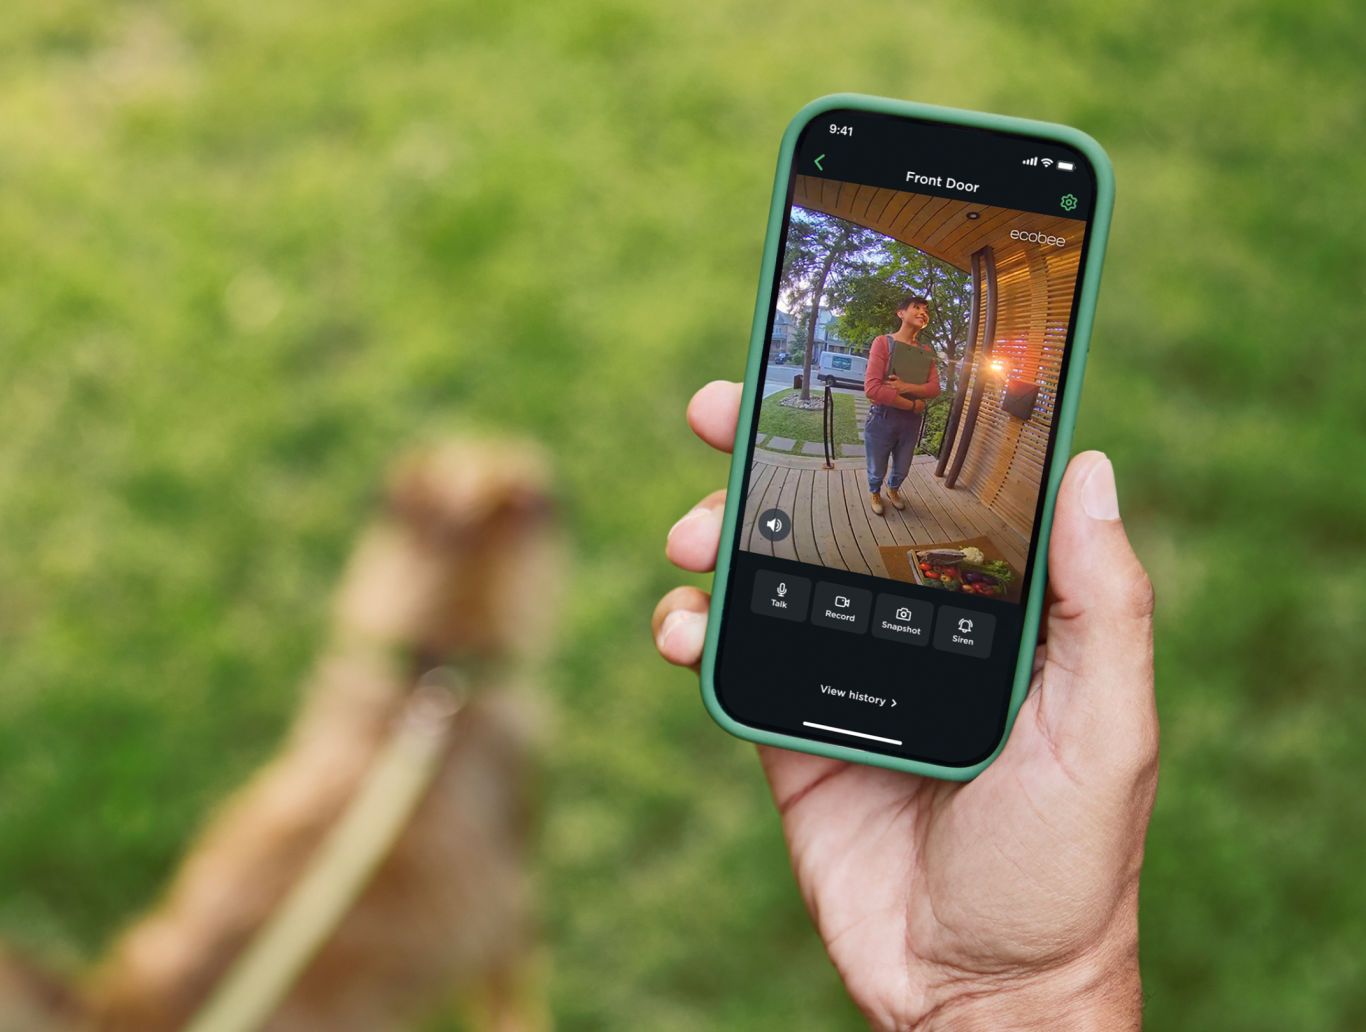 A smart phone with a live view of an individual's front door is held in their hand while they are walking their dog outside